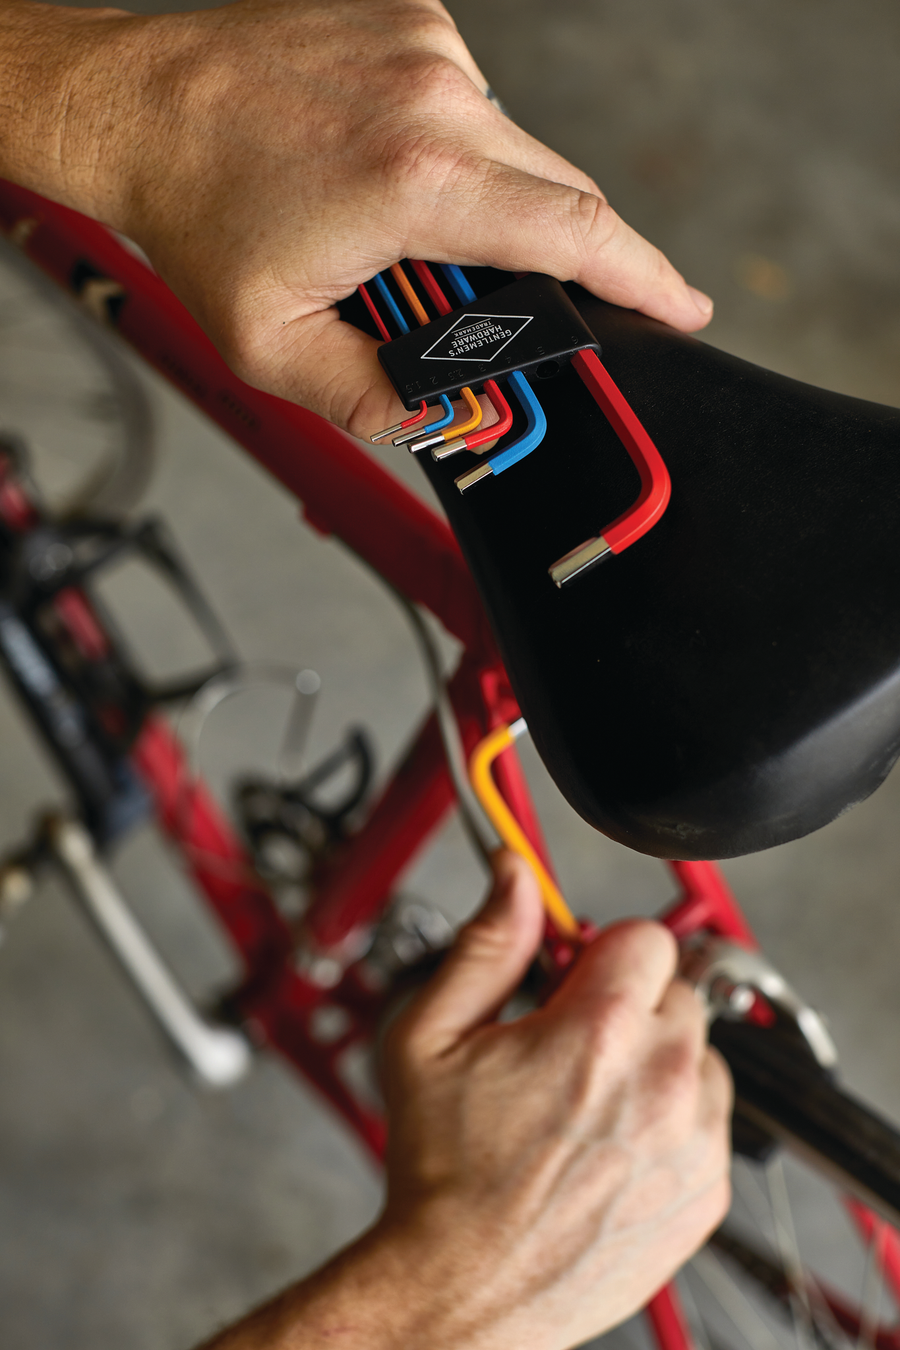 Hex keys in use on a bicycle seat. 